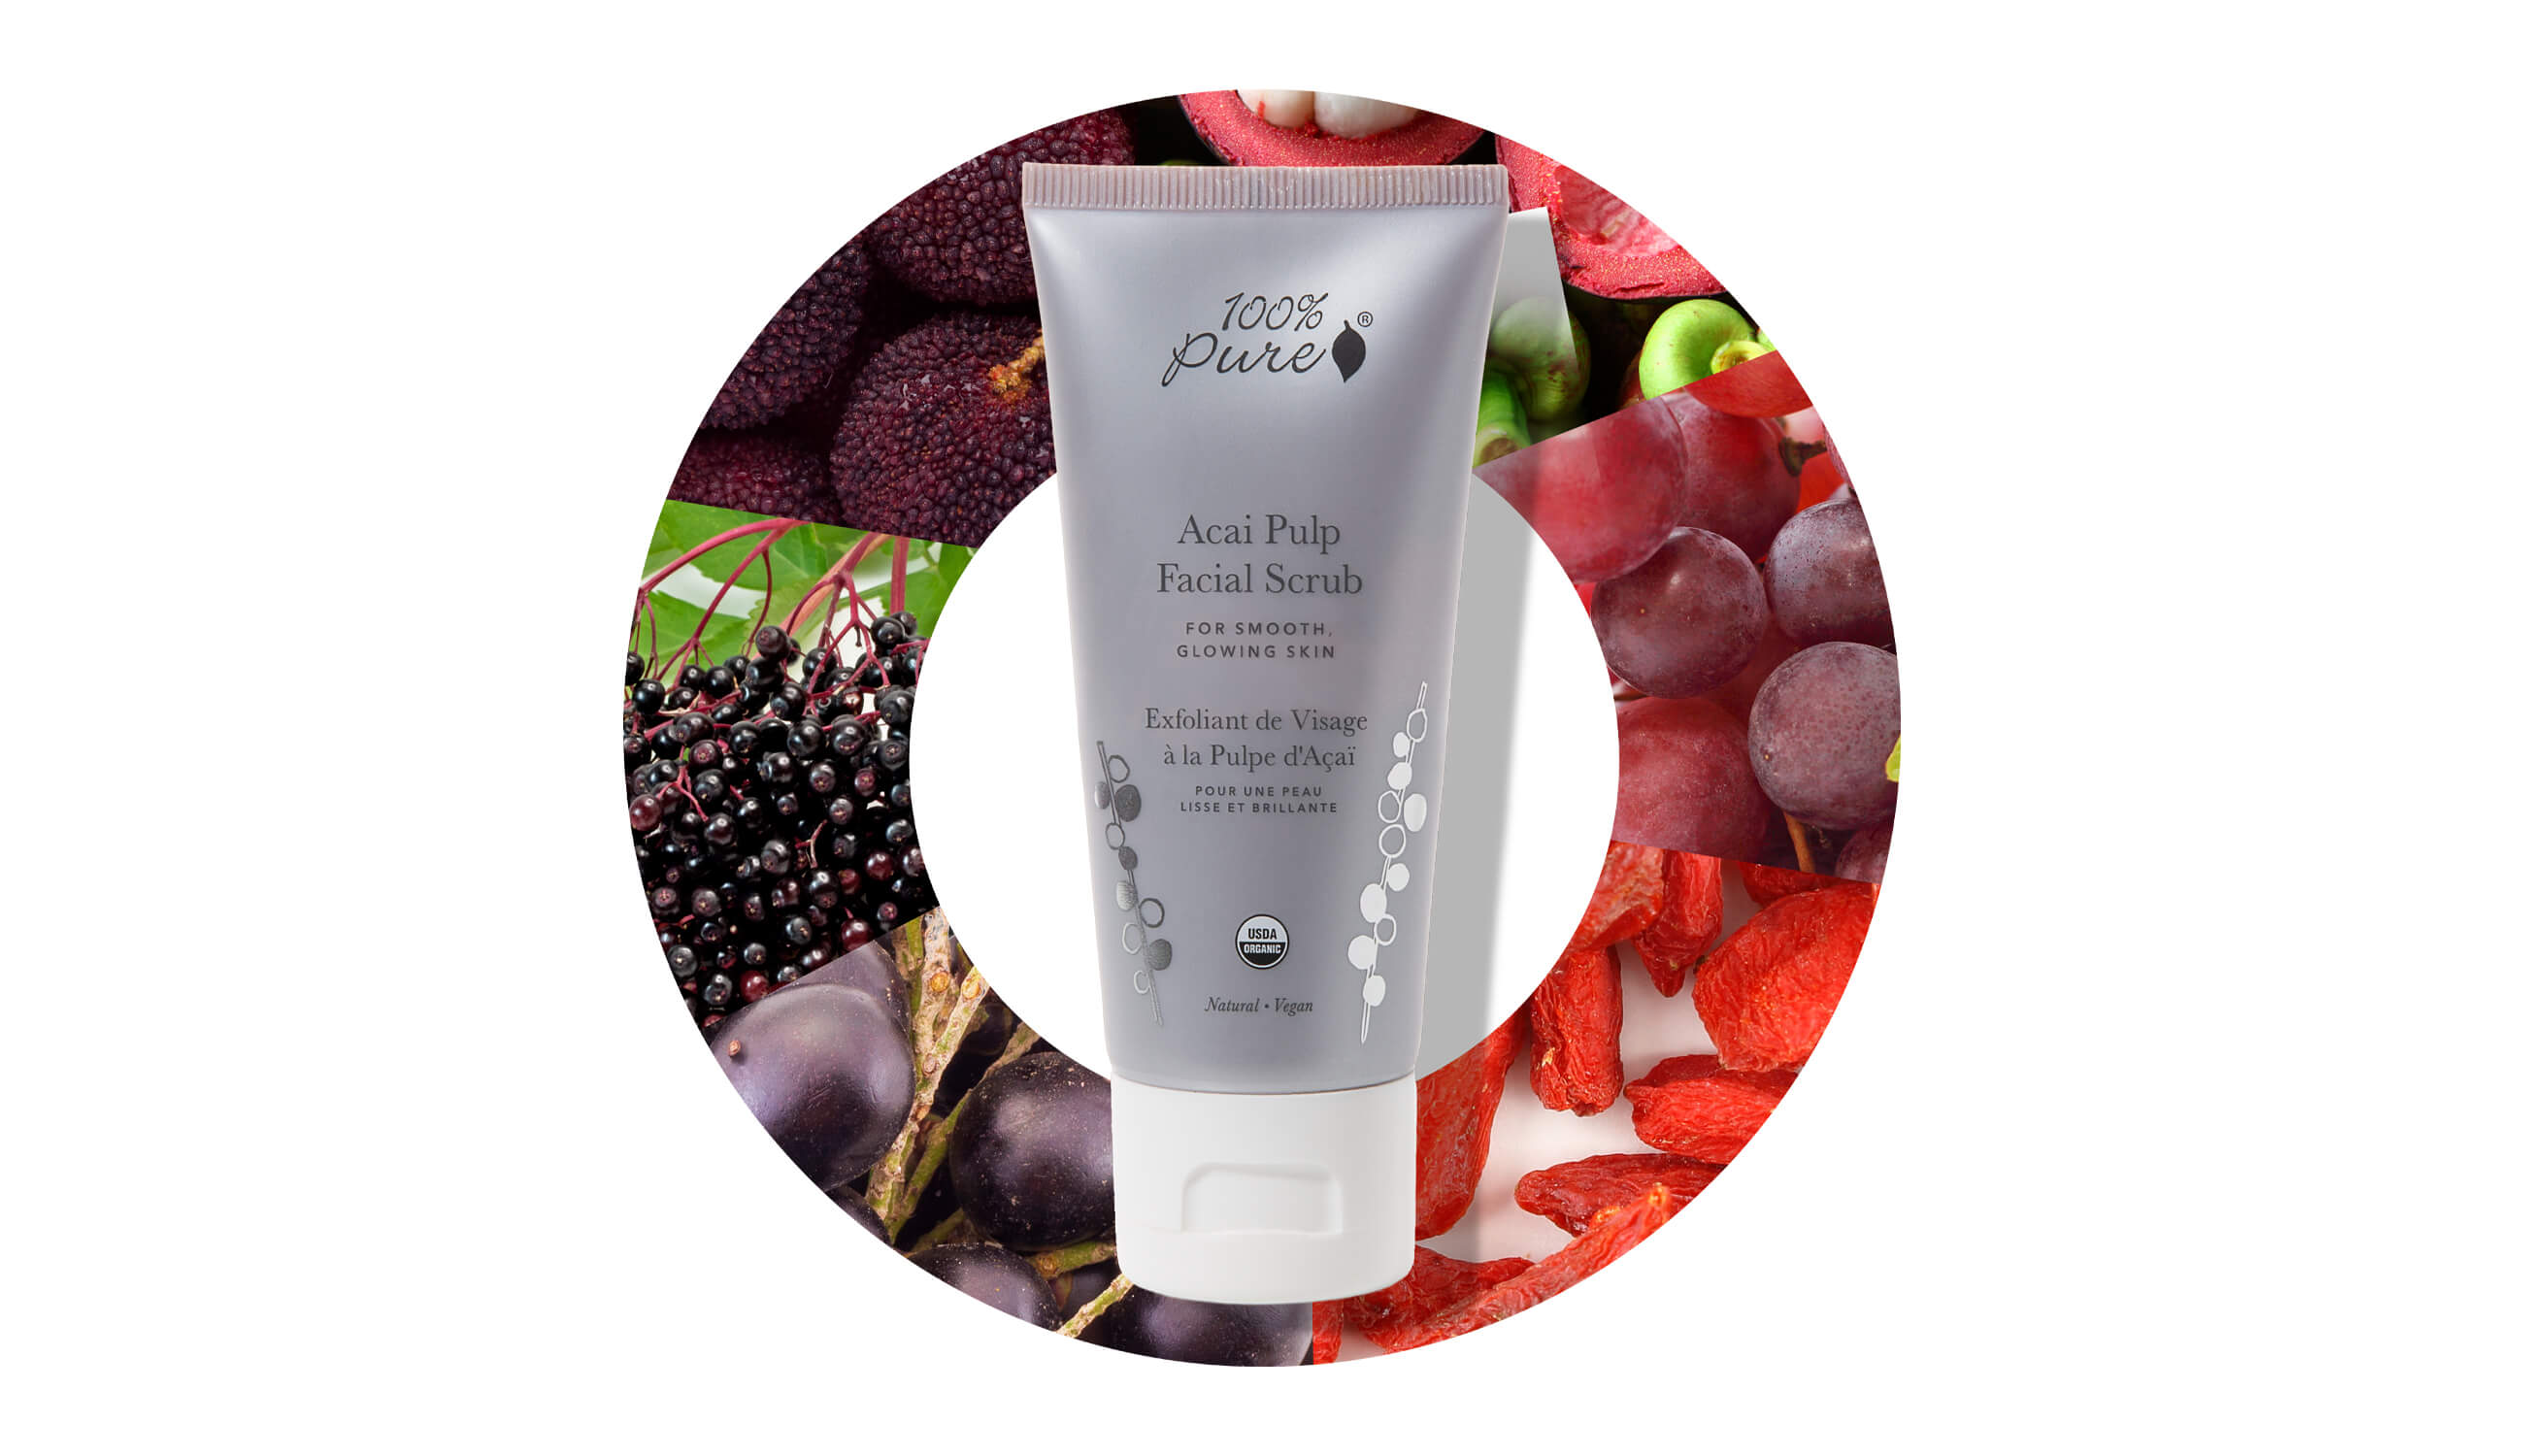 Acai Pulp Facial Scrub packed with superfruits for skin health